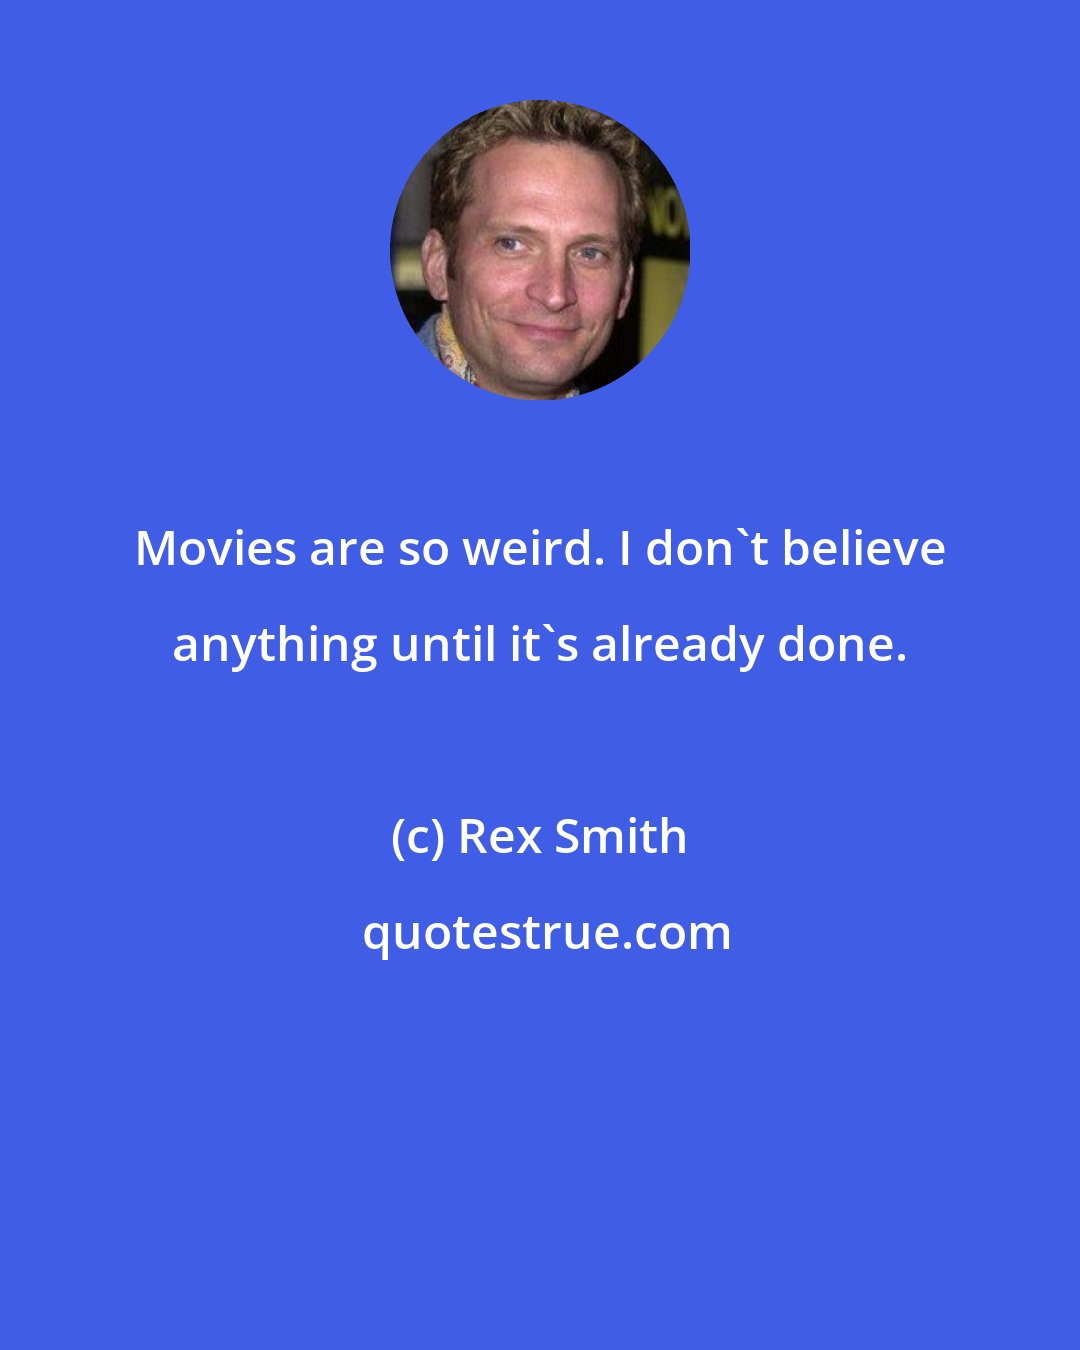 Rex Smith: Movies are so weird. I don't believe anything until it's already done.